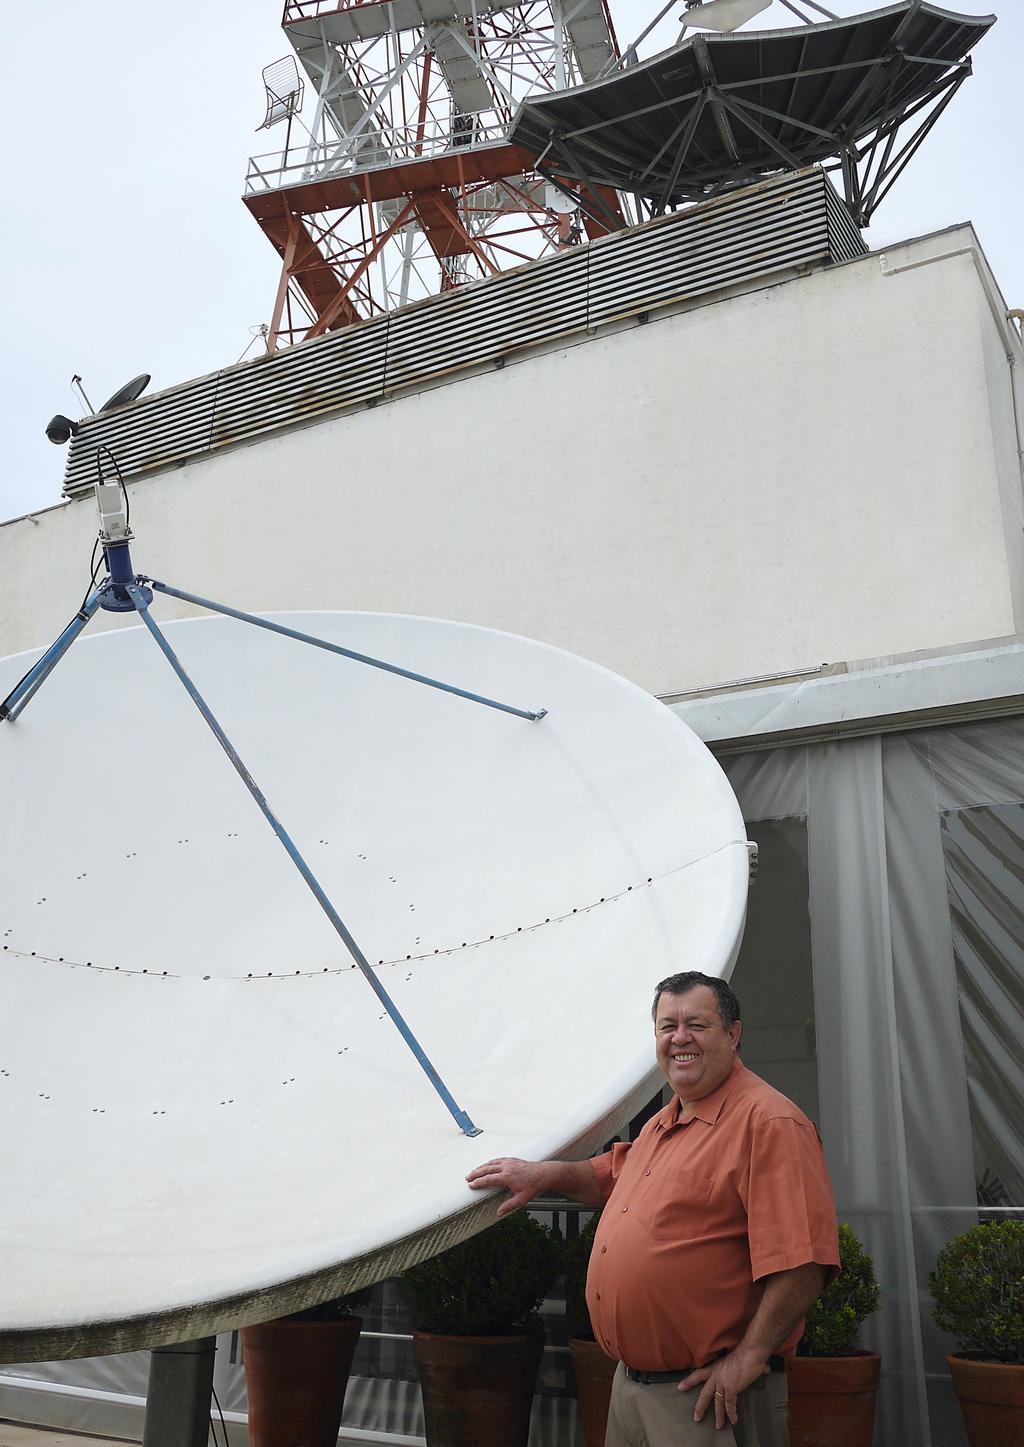 This is Nivaldo da Silva. He is the Sao Paulo region s satellite specialist when it has to do with the precise alignment of satellite antennas.